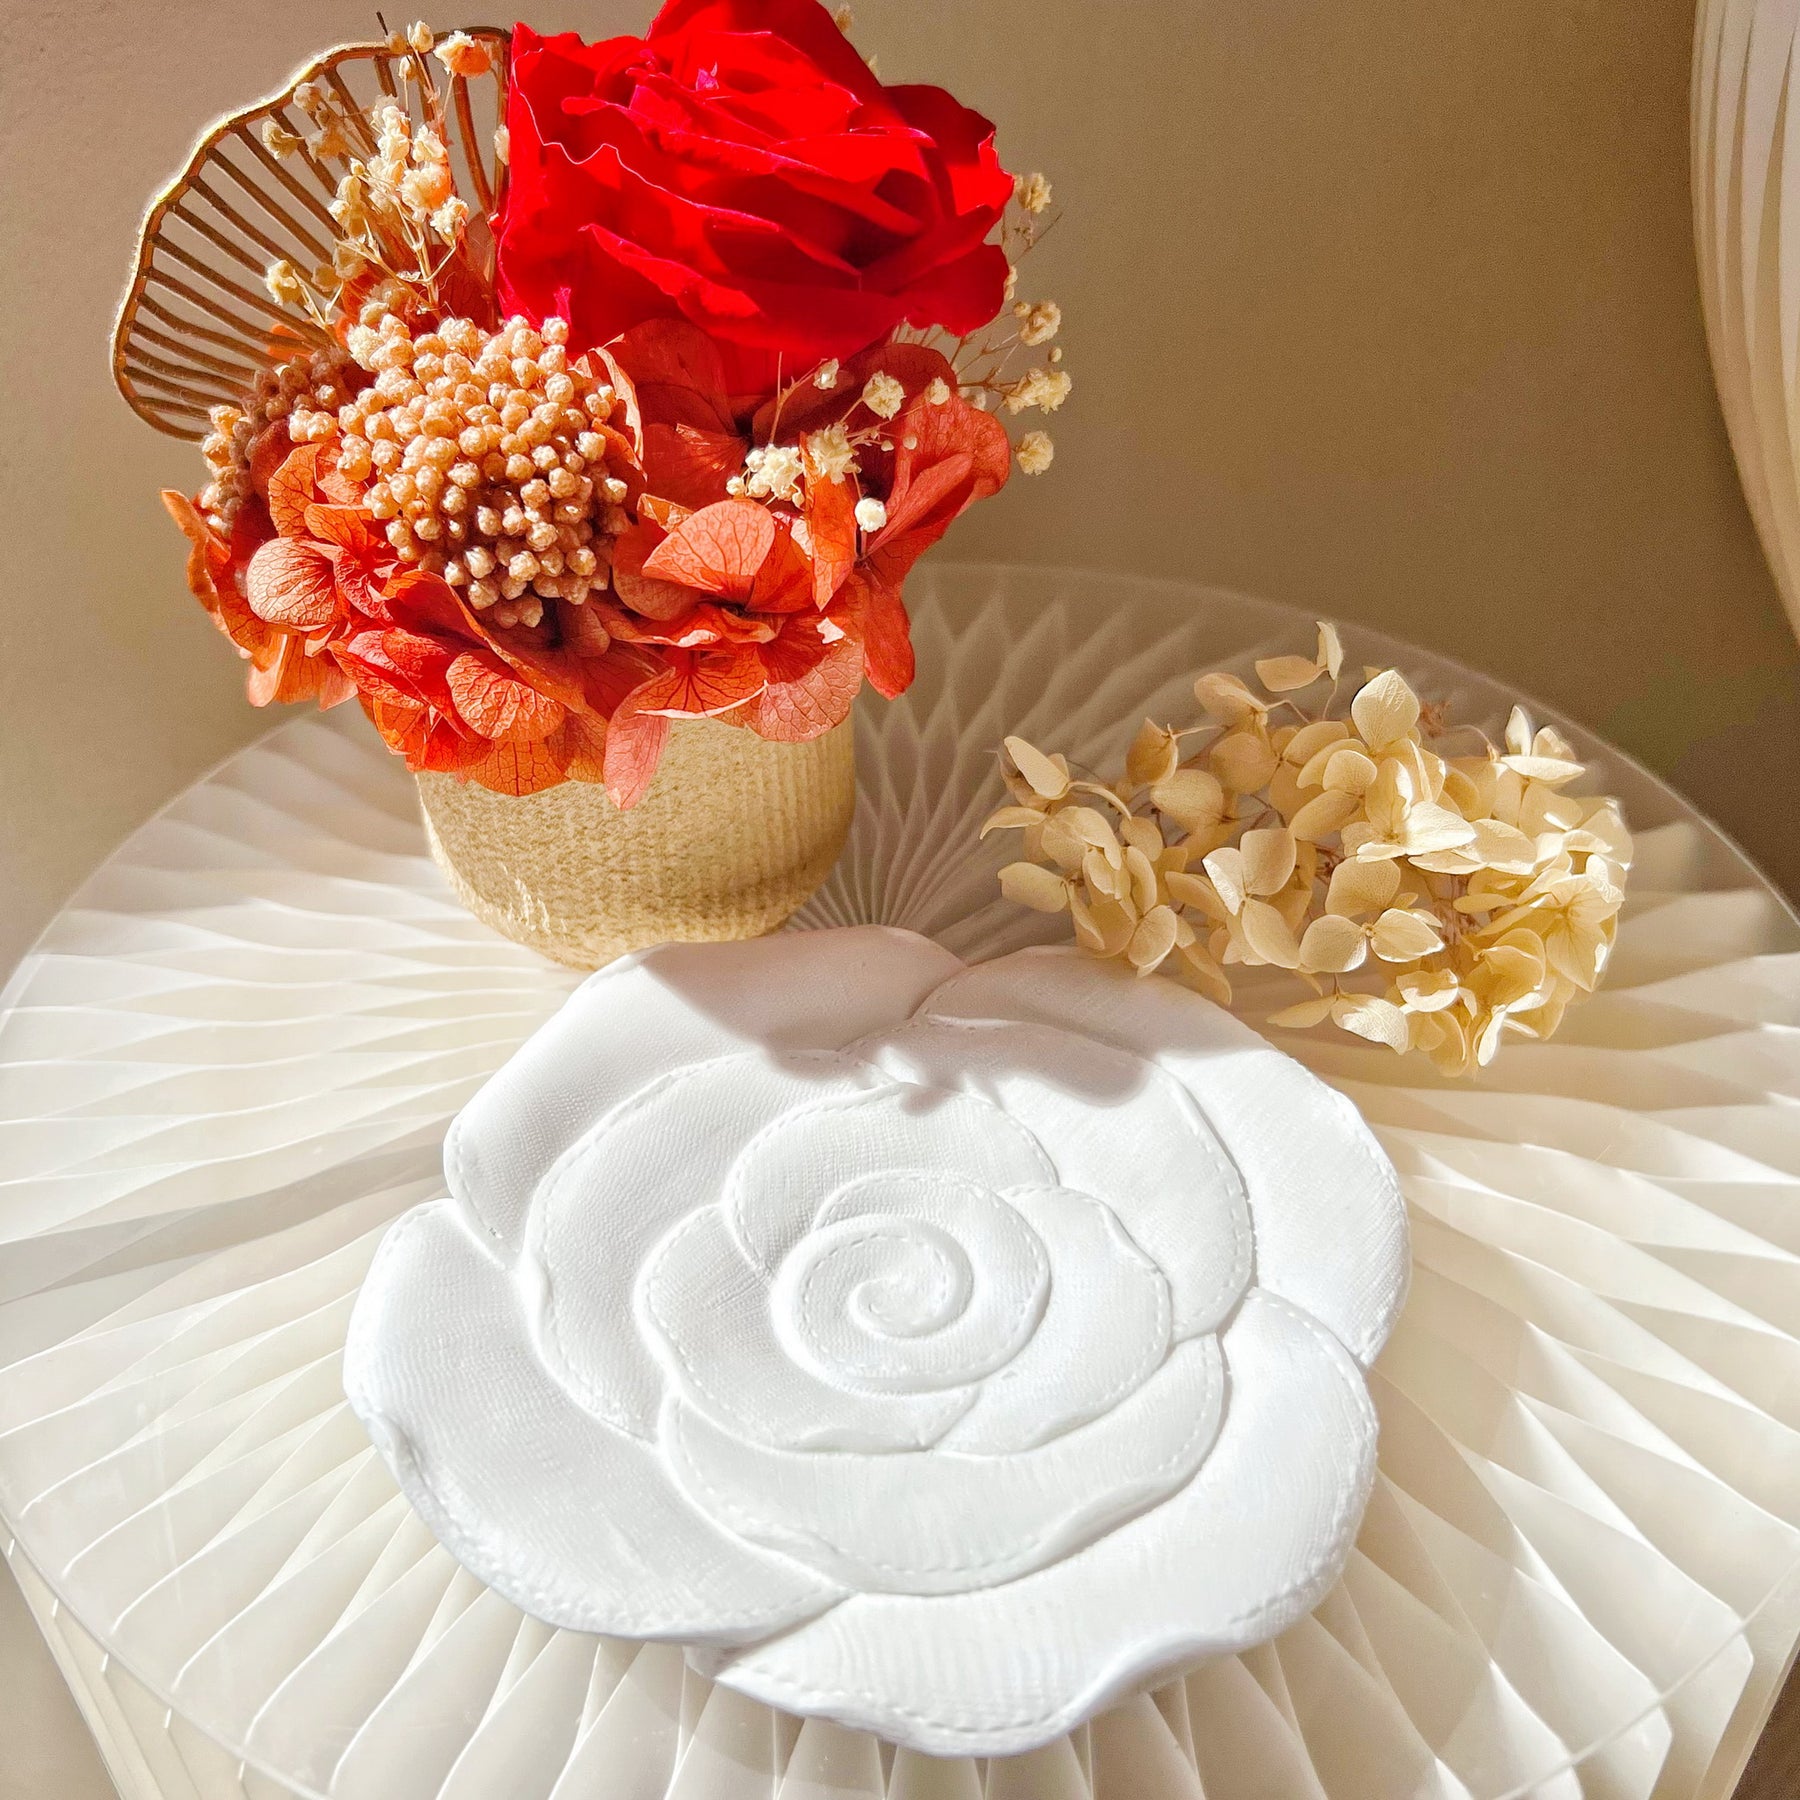 Handcrafted Rose Blossom Decorative Tray | Trinket Dish - LMJ Candles